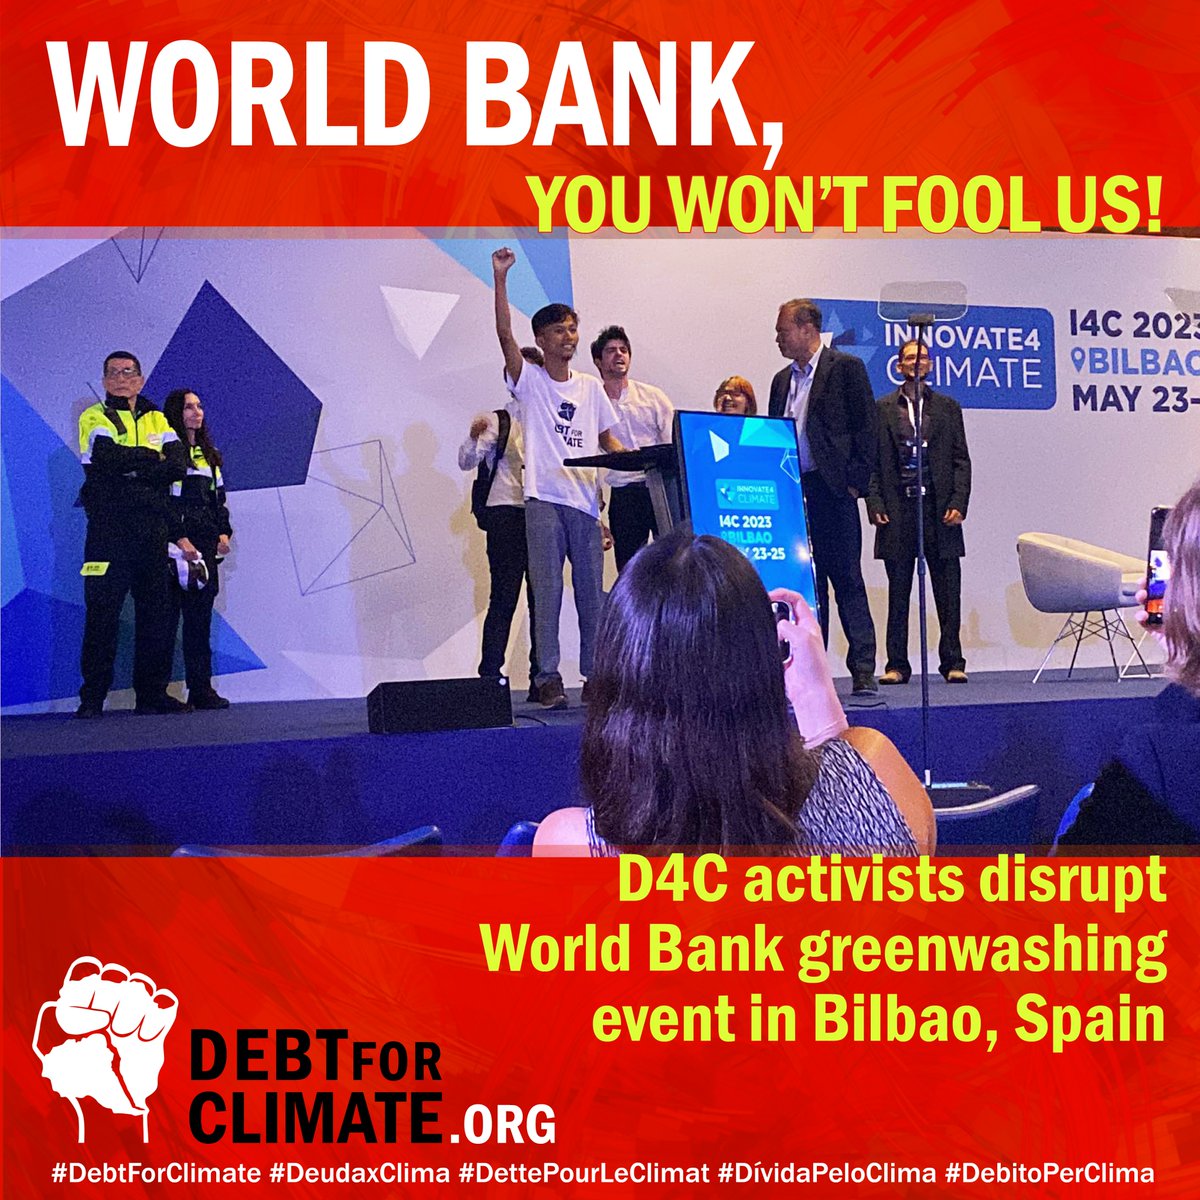 1/6 On Thursday,  #DebtforClimate activists disrupted the #Innovate4Climate conference of the #WorldBank in Bilbao and confronted WB's Director of Climate Change Affairs @JenniferJSara1 with the demand of #DebtCancellation for the Global South. 
#ClimateActionWBG #Greenwashing
👇